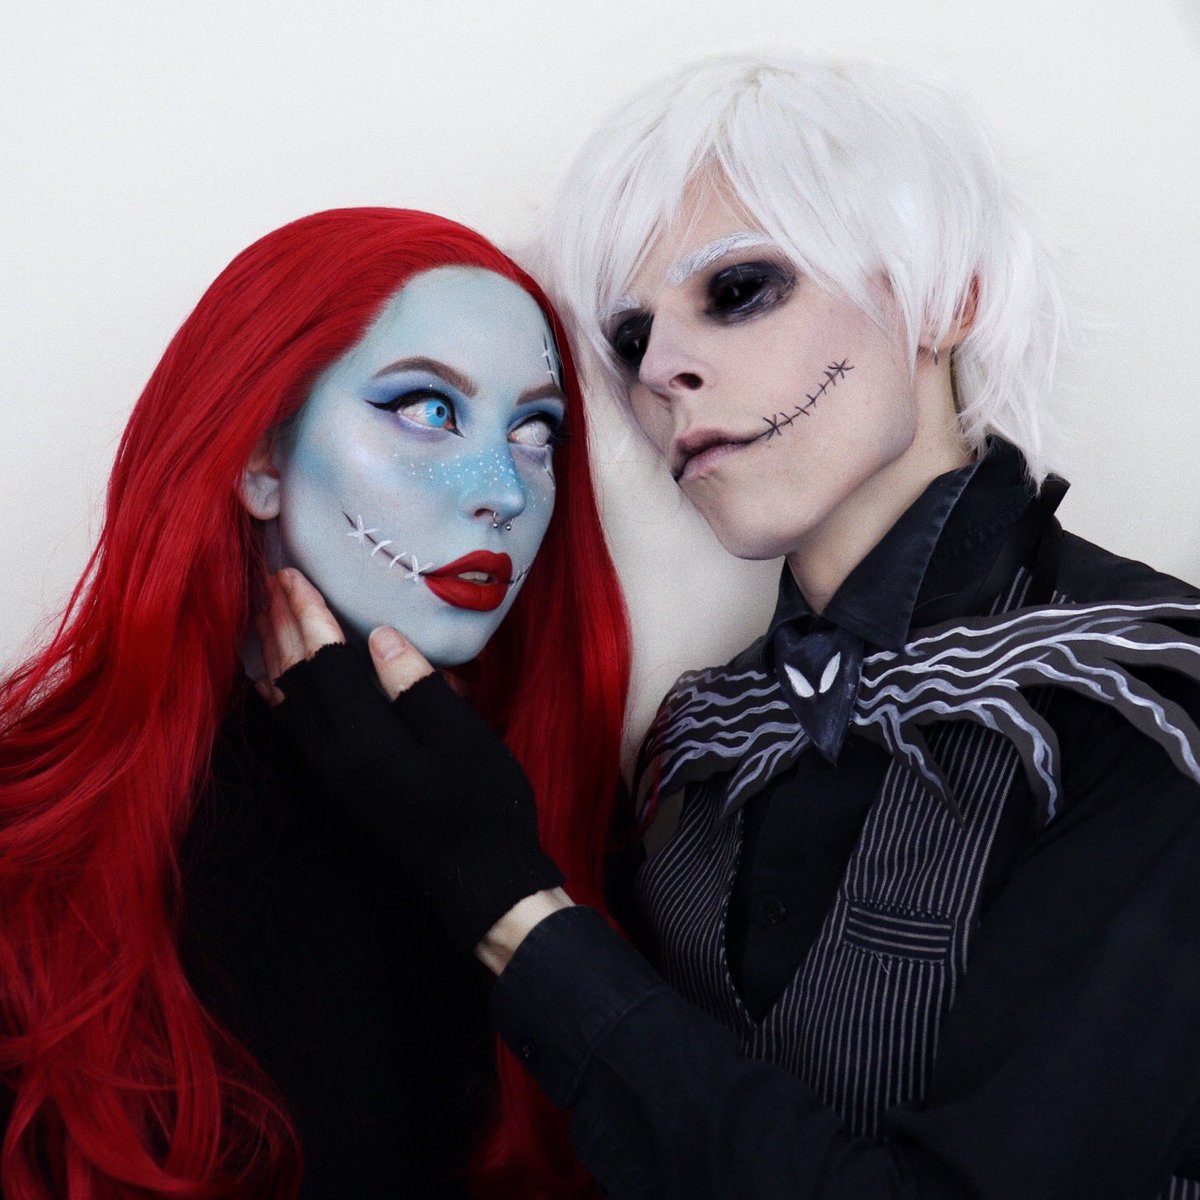 Ｄｅｍｏ Ａｎｉｍｅ  Perfect couple cosplay doesnt ex  wait a  Facebook